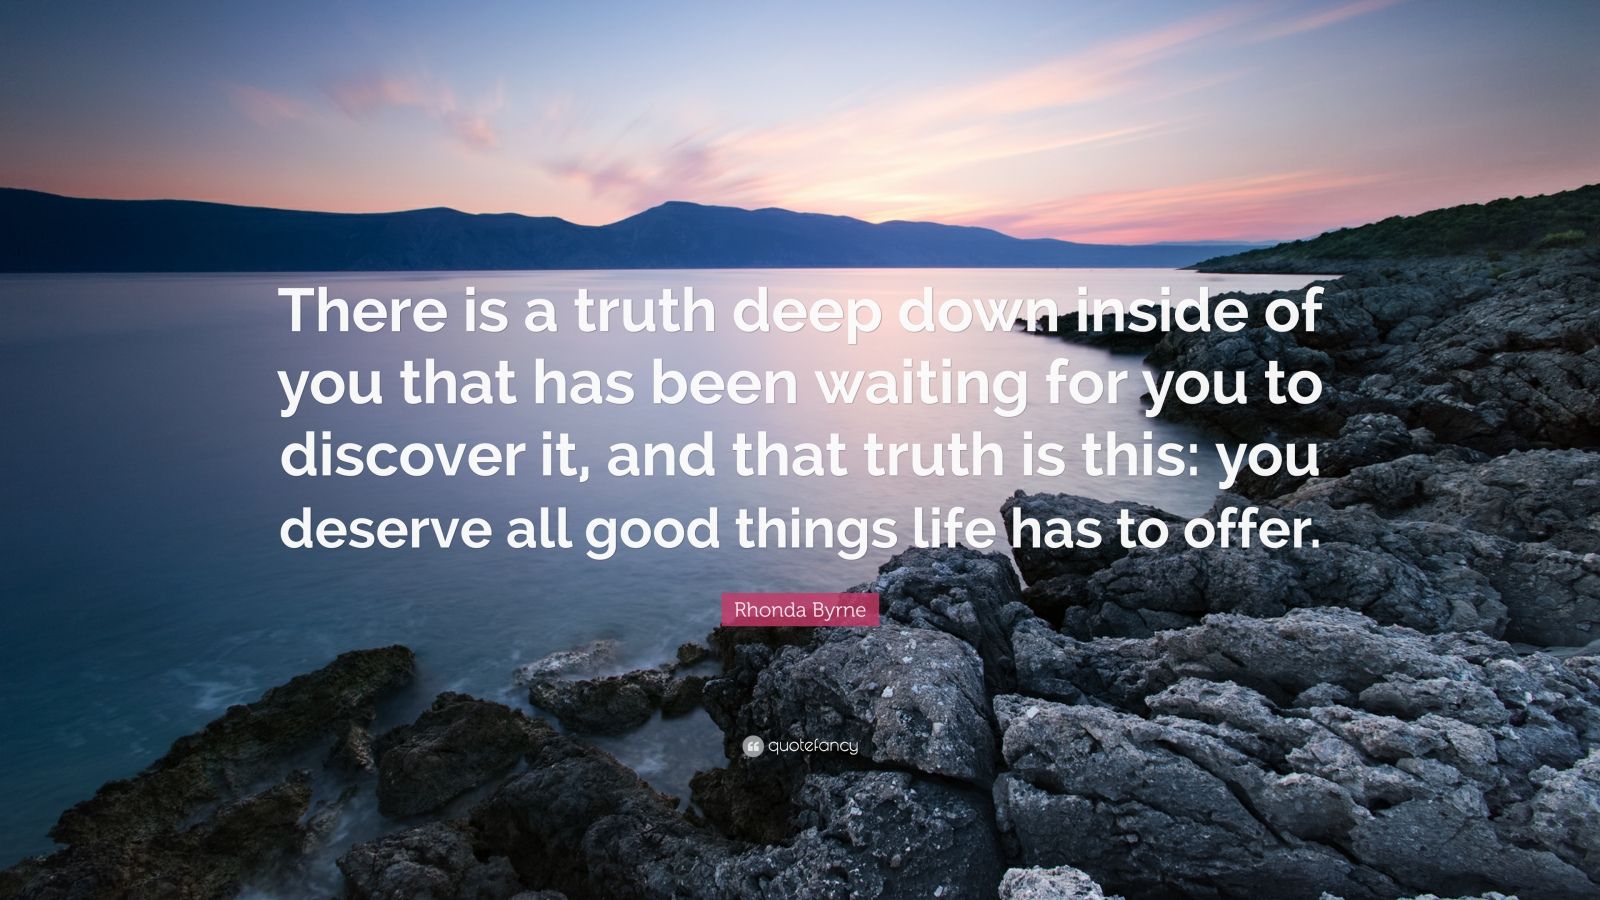 Rhonda Byrne Quote: “There is a truth deep down inside of you that has ...